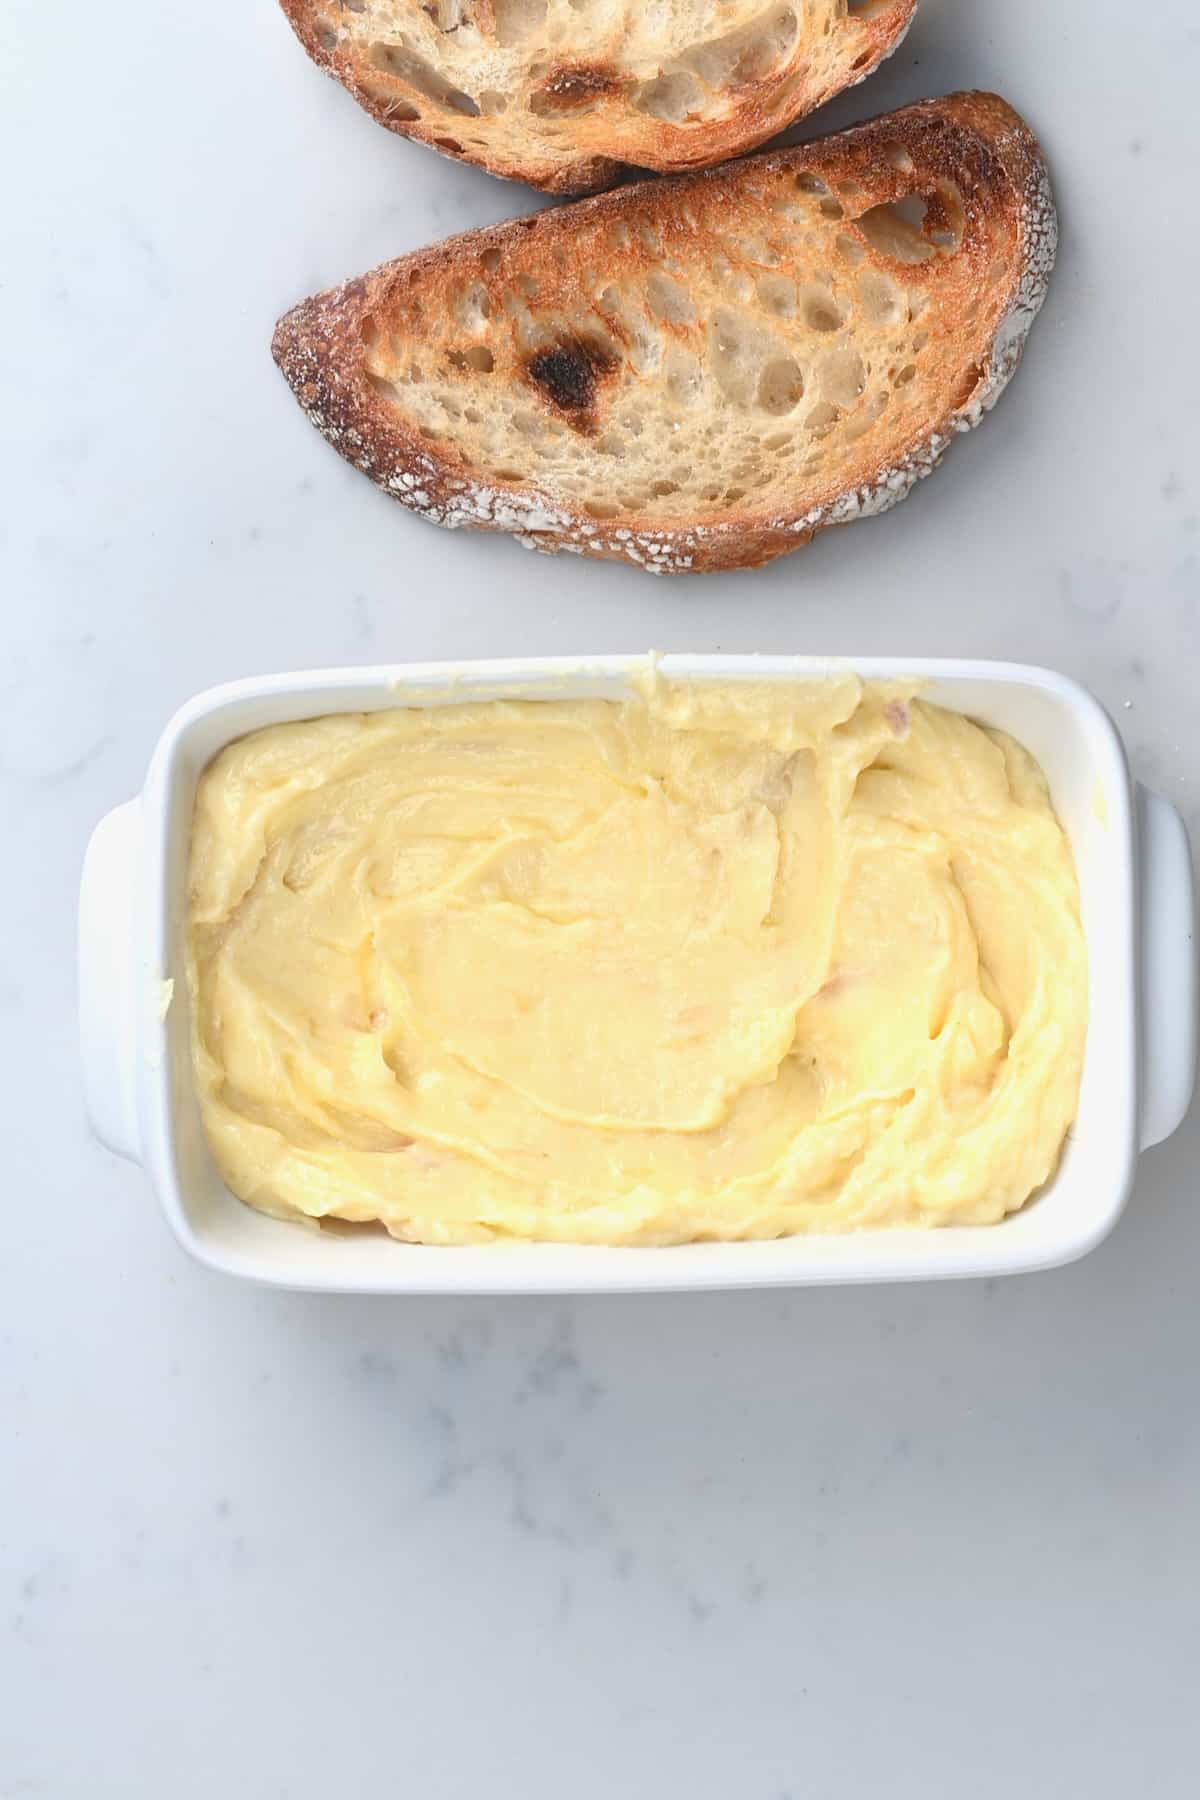 Roasted garlic butter and two toasts